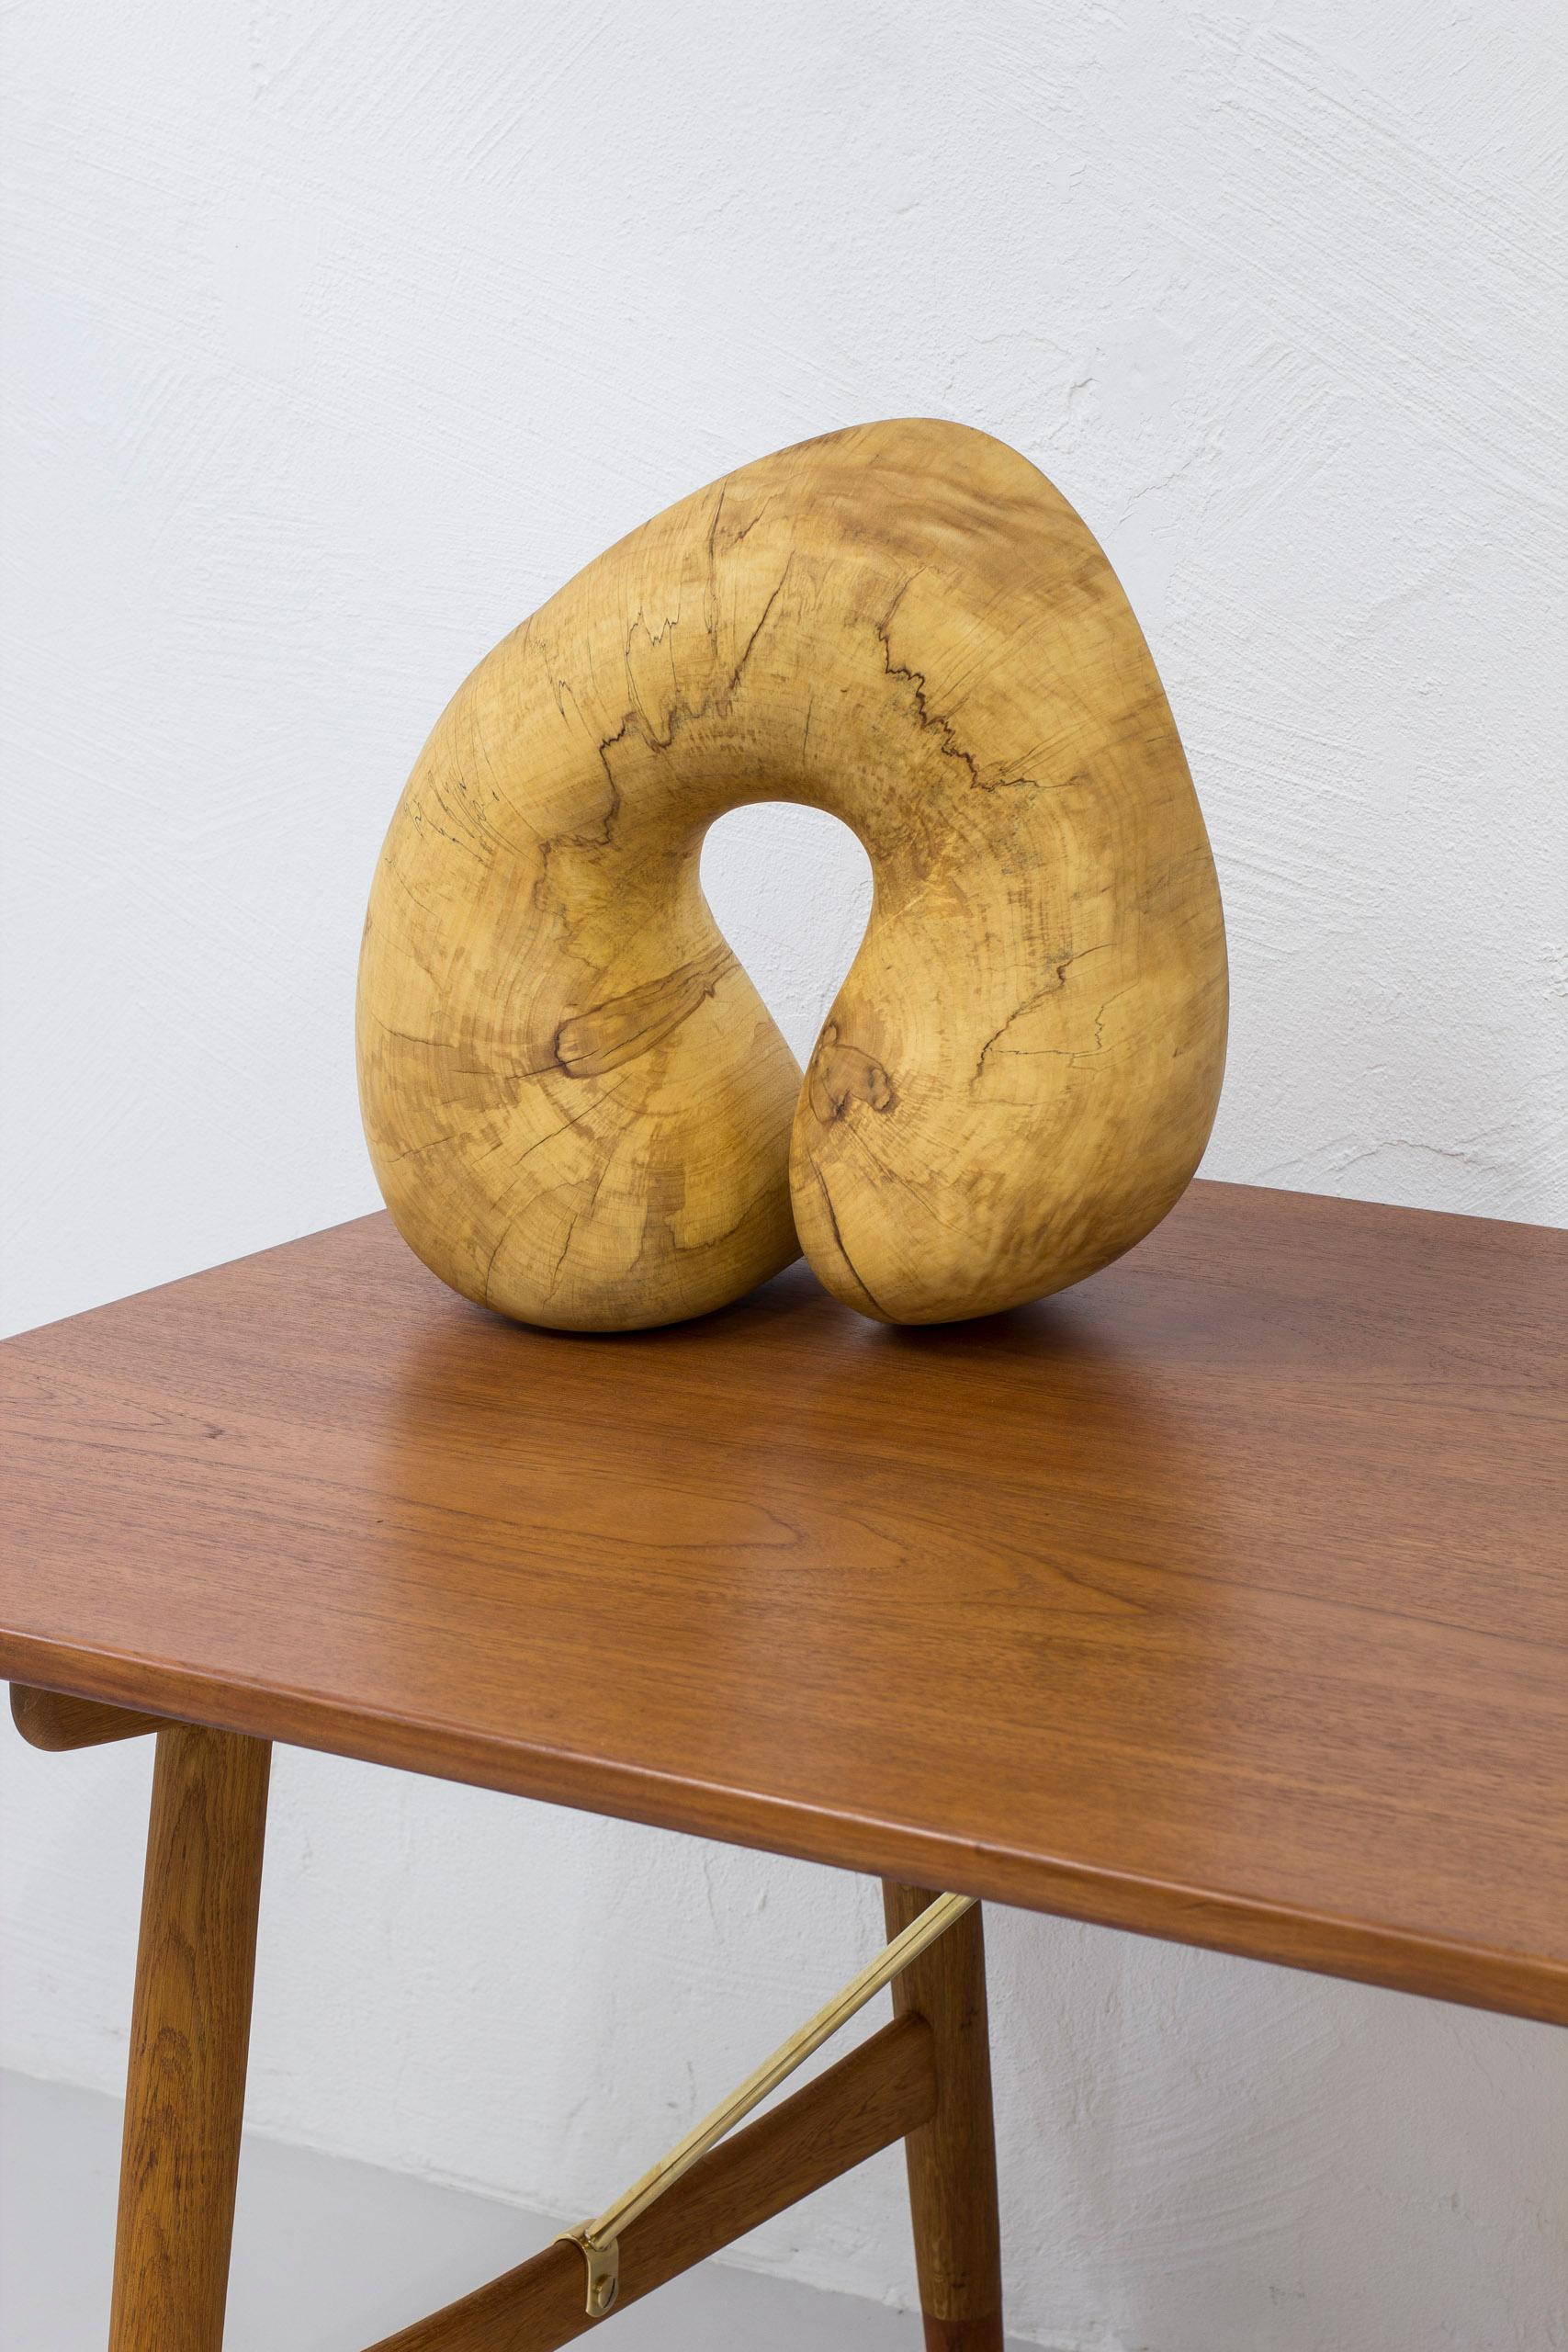 Large organic free form wood sculpture made by hand in Denmark during the 1950-60s. Made by Danish wood carver or sculptor from a solid piece of maple. Heavy and highly expressive. Unique. Very good condition with few signs of age related wear and